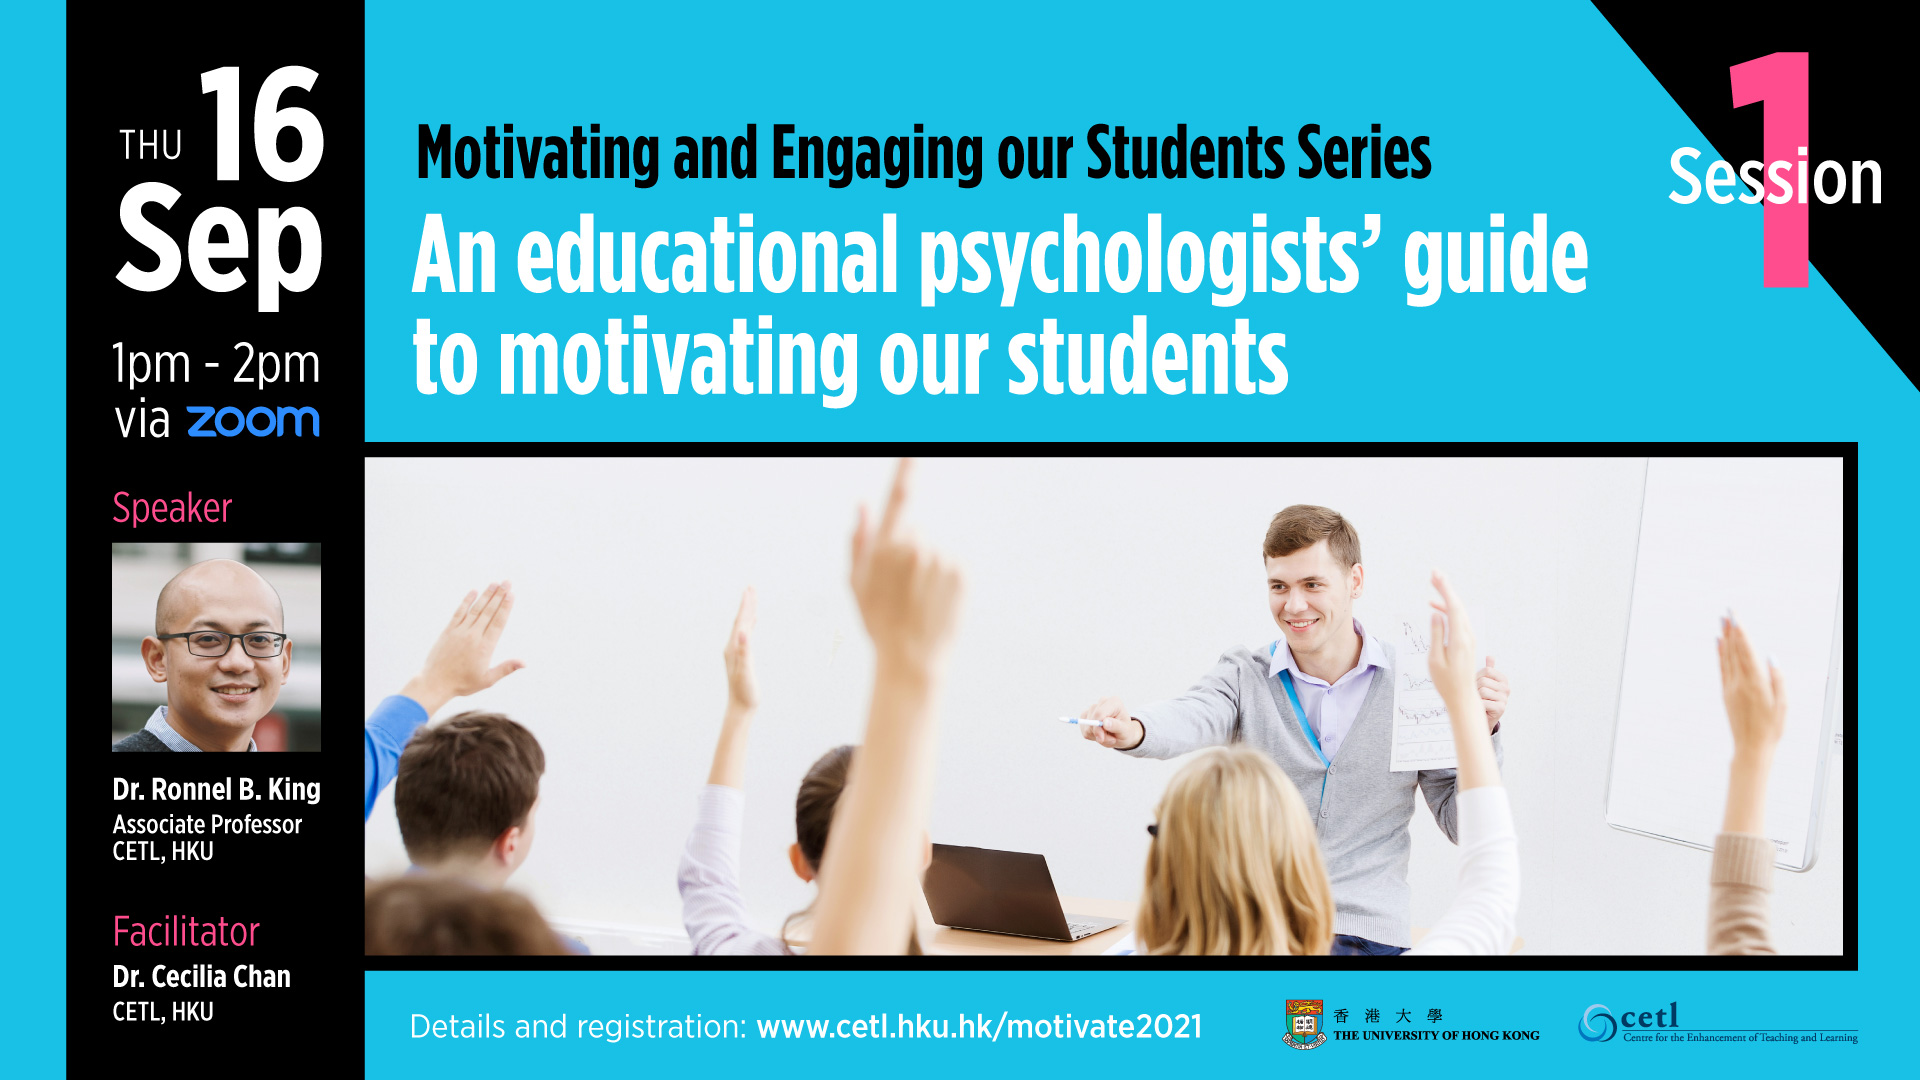 Session 1: An educational psychologists’ guide to motivating our students